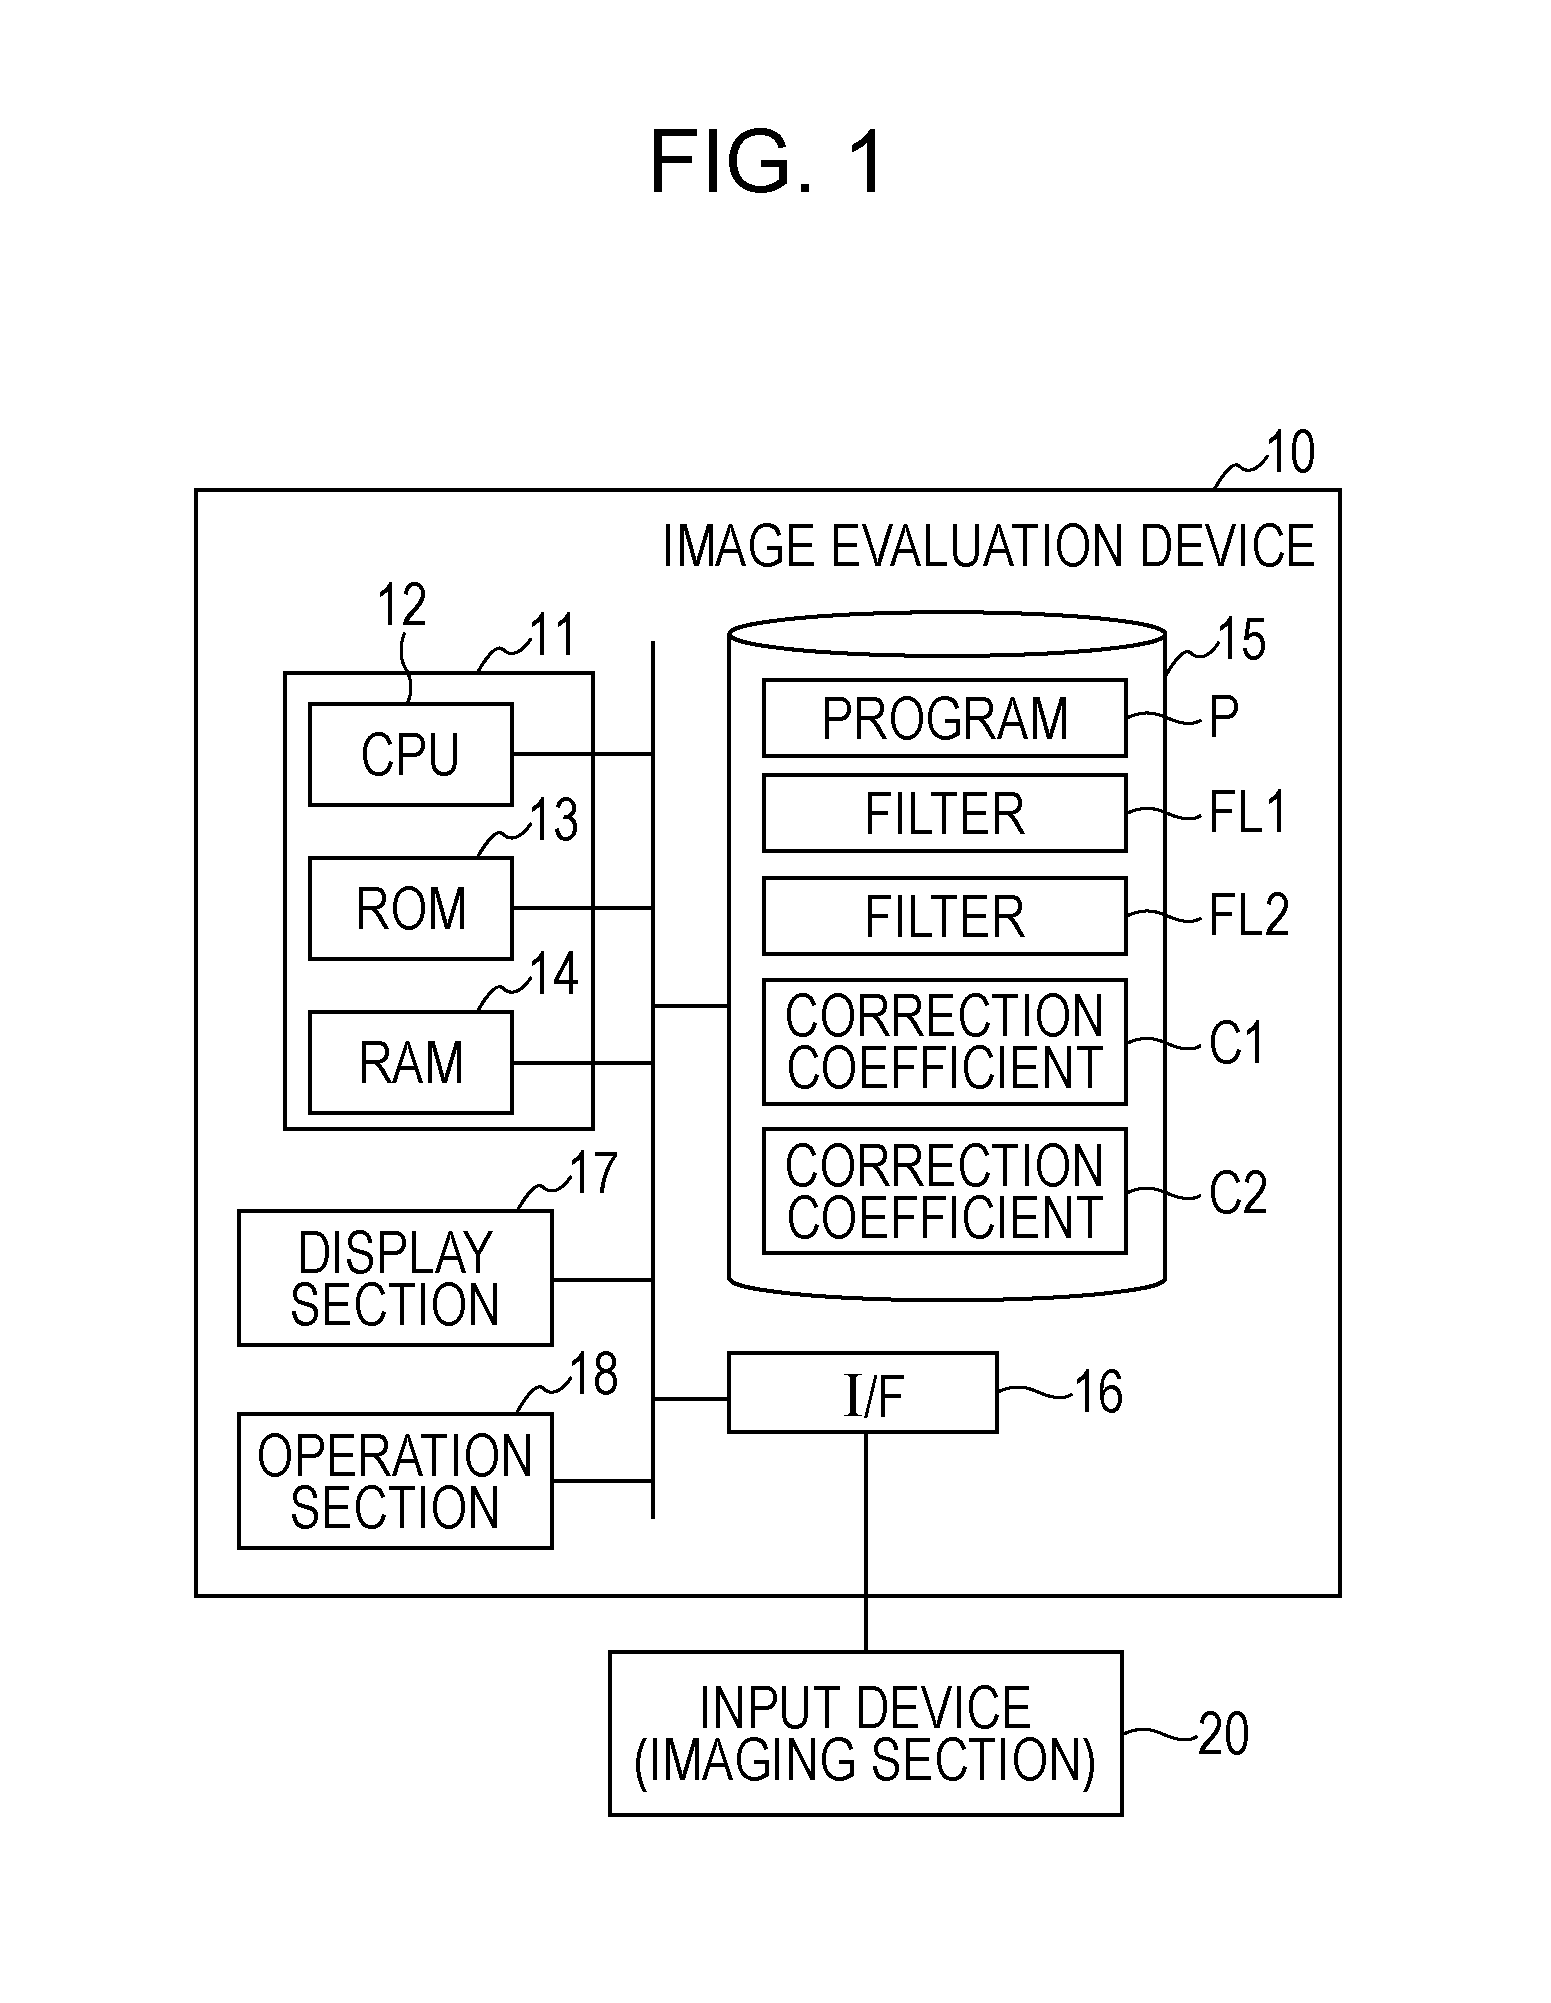 Image evaluation device and image evaluation program with noise emphasis correlating with human perception